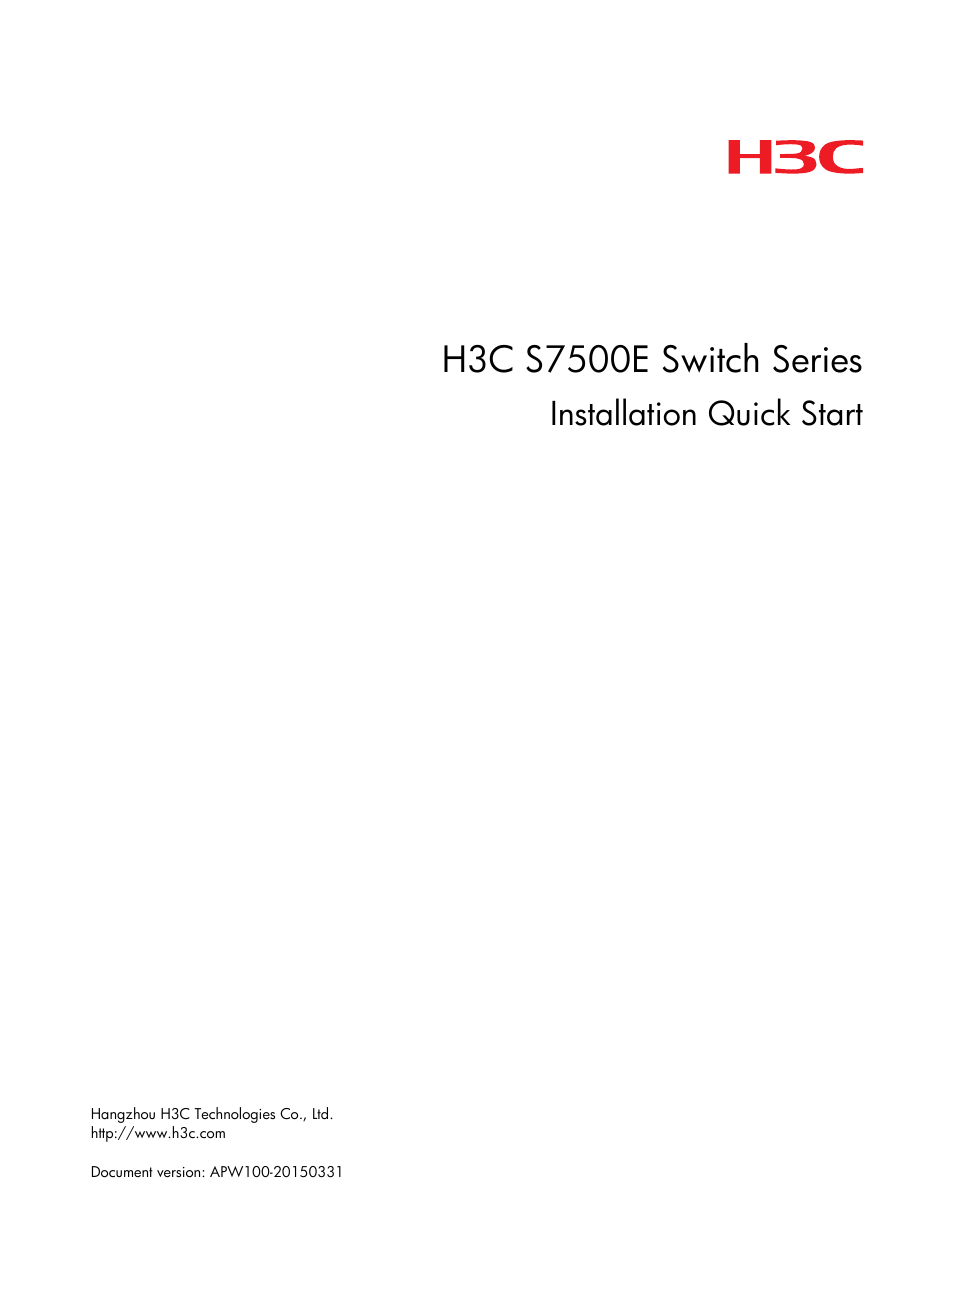 H3C Technologies H3C S7500E Series Switches User Manual | 25 pages